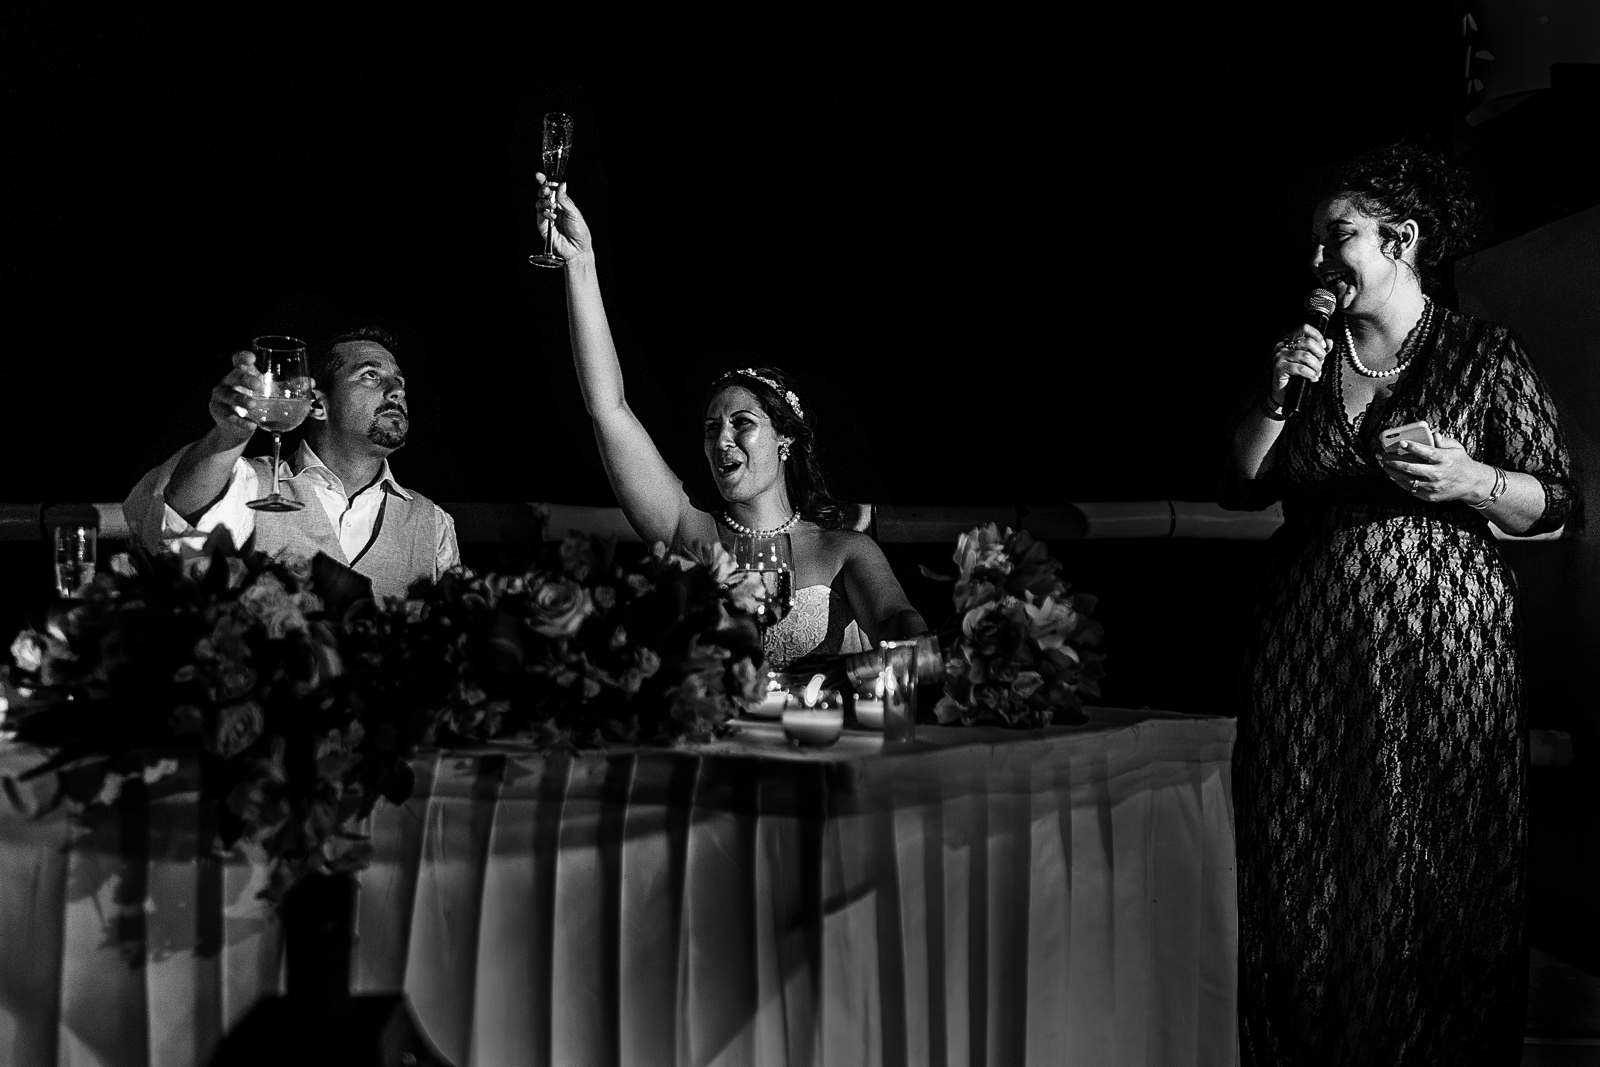 Maid of honor giving a speech, groom and bride raising their champagne glasses